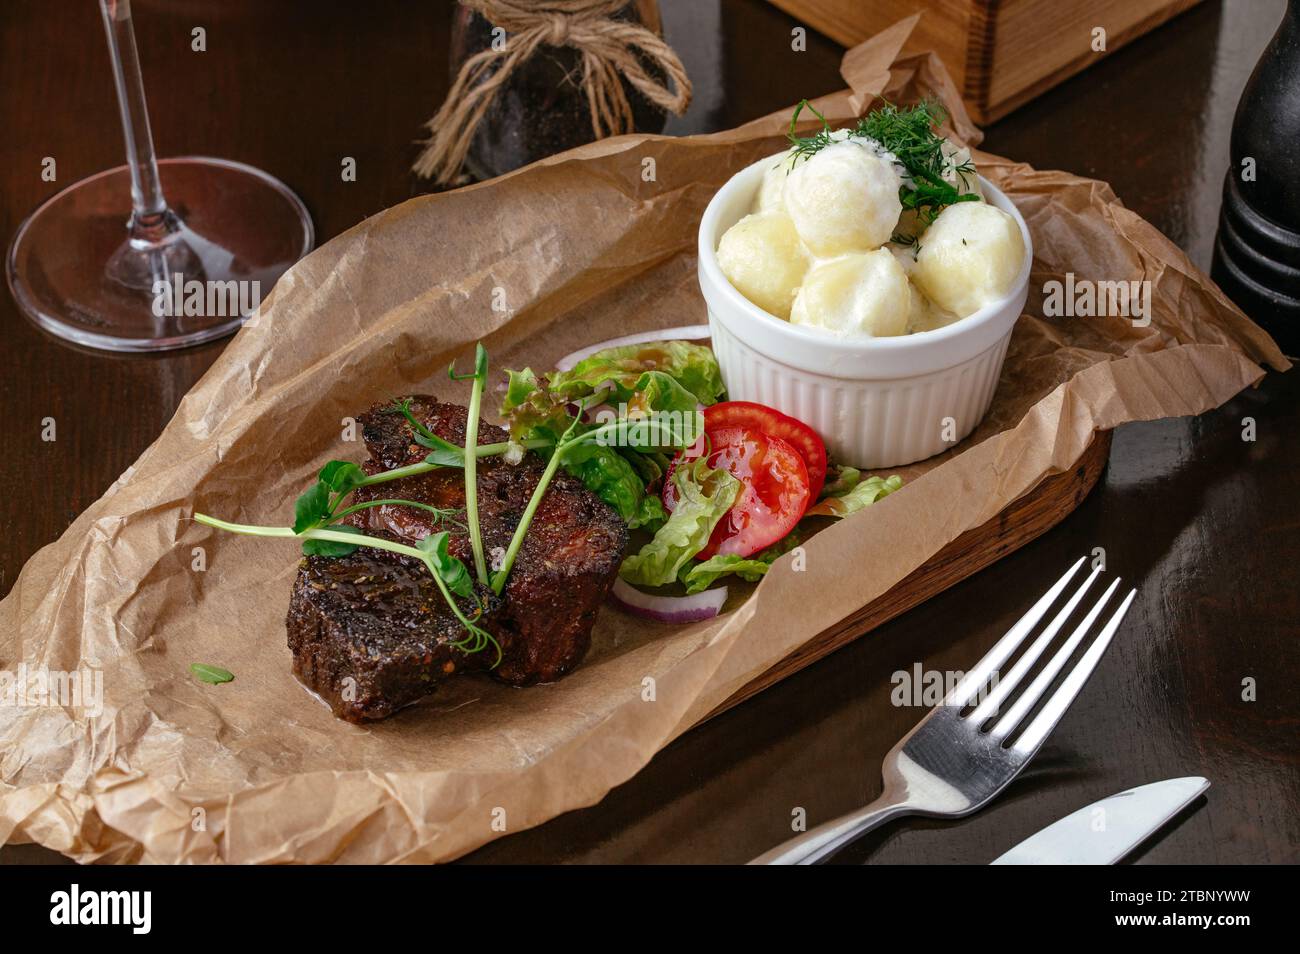 Baked beef with vegetables (carrots, peas, potatoes), horizontal Stock Photo